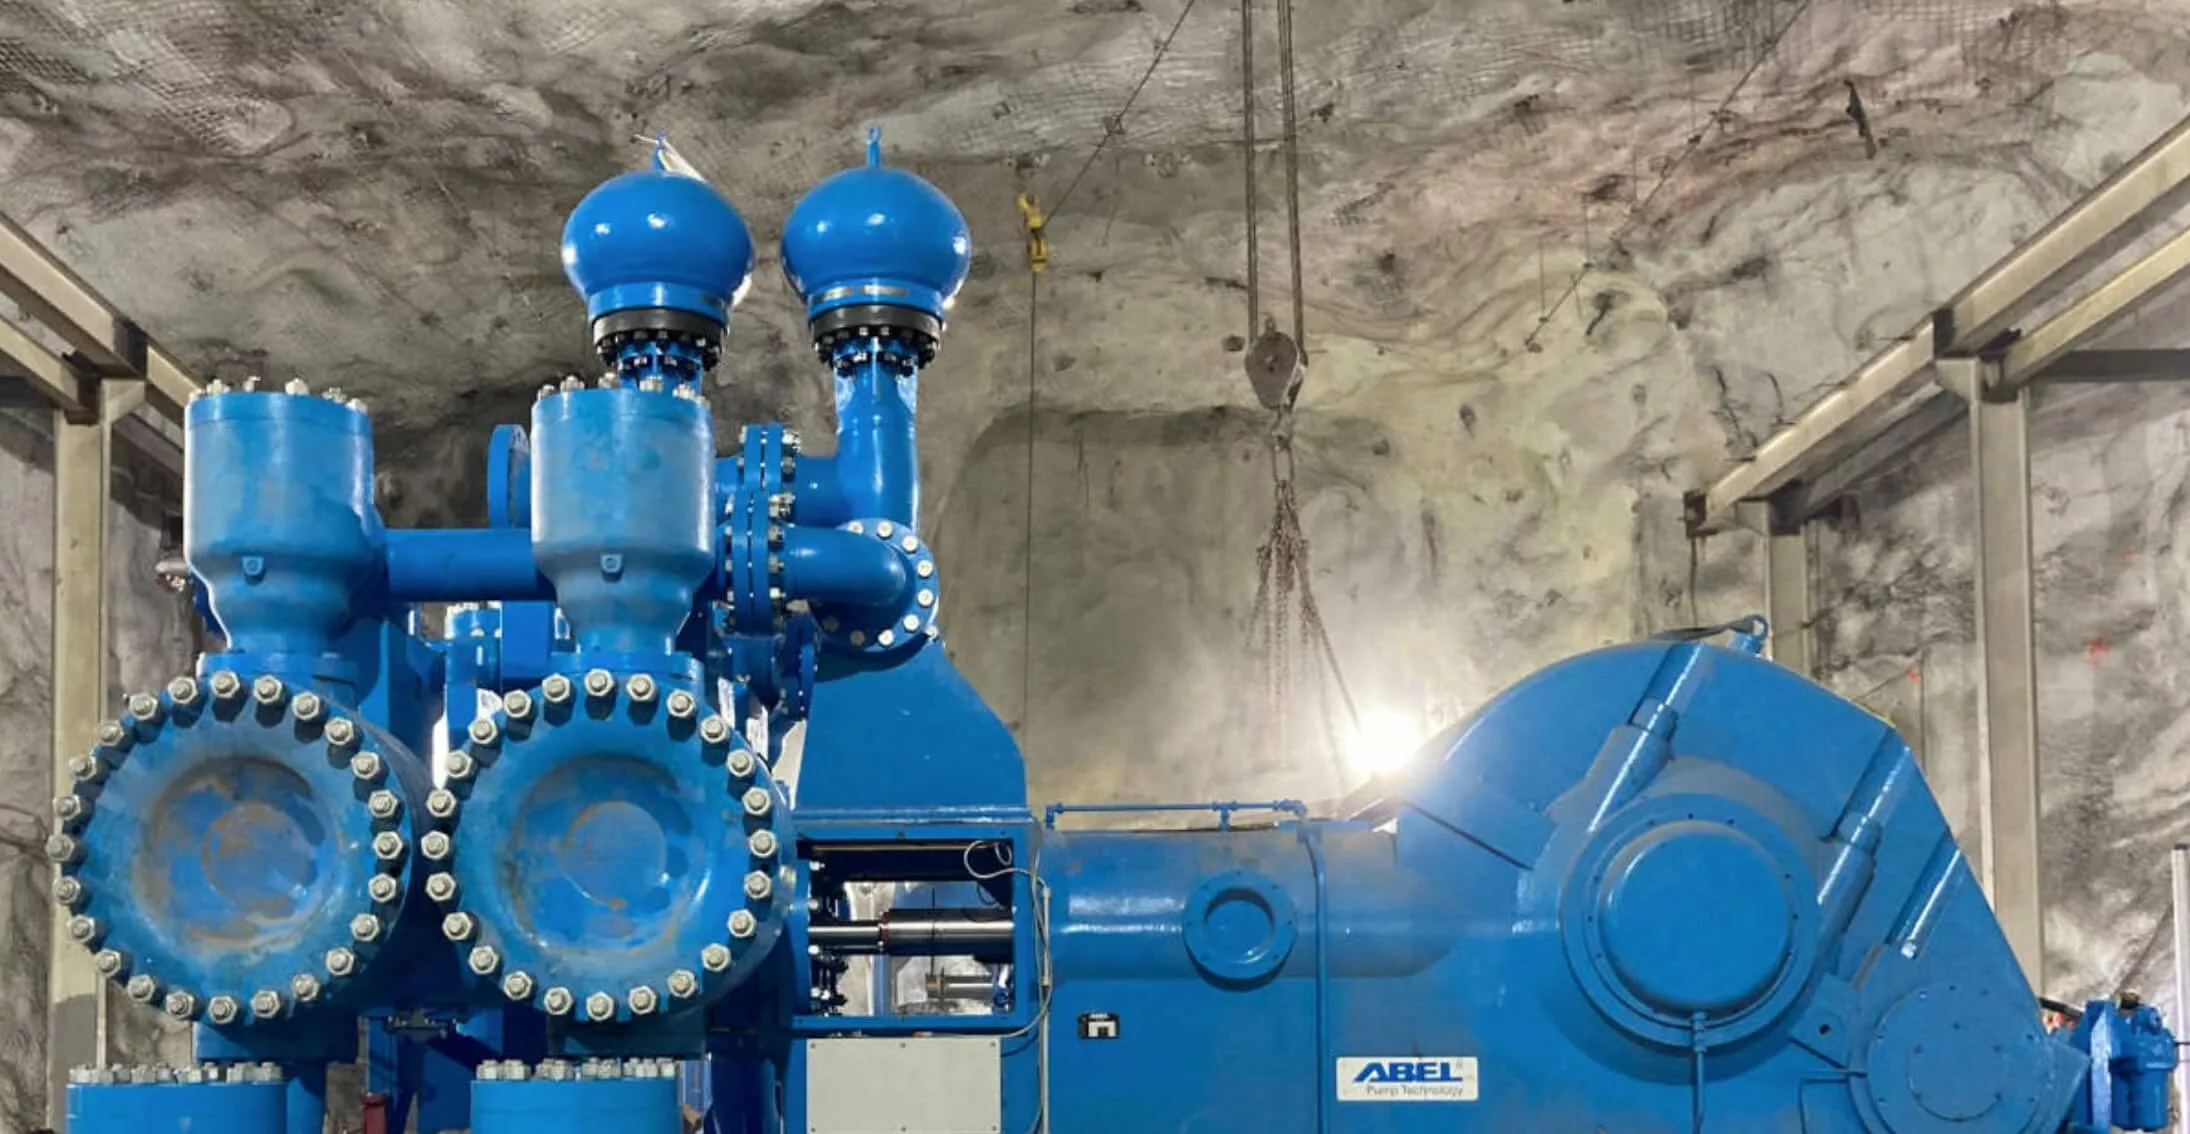 An industrial Abel mining pump in a rugged mining environment, showcasing the robust and high-performance equipment provided by Arroyo Process Equipment for the mining industry in Trinidad and the Caribbean. The image highlights the pump's durability and efficiency in demanding conditions.